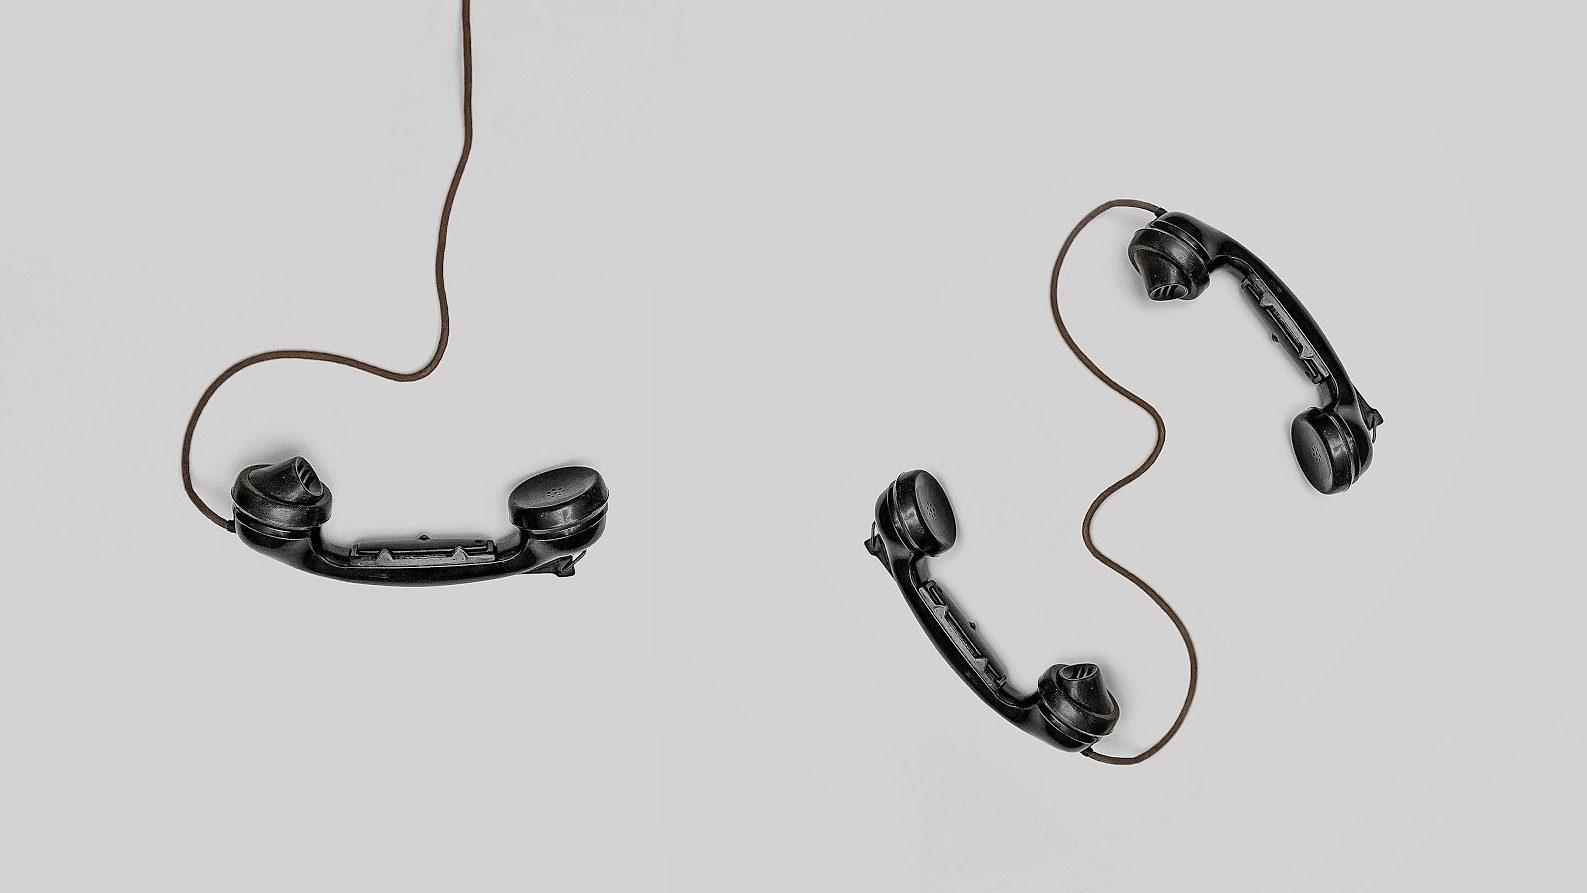 phone-cord-connection-old-handset